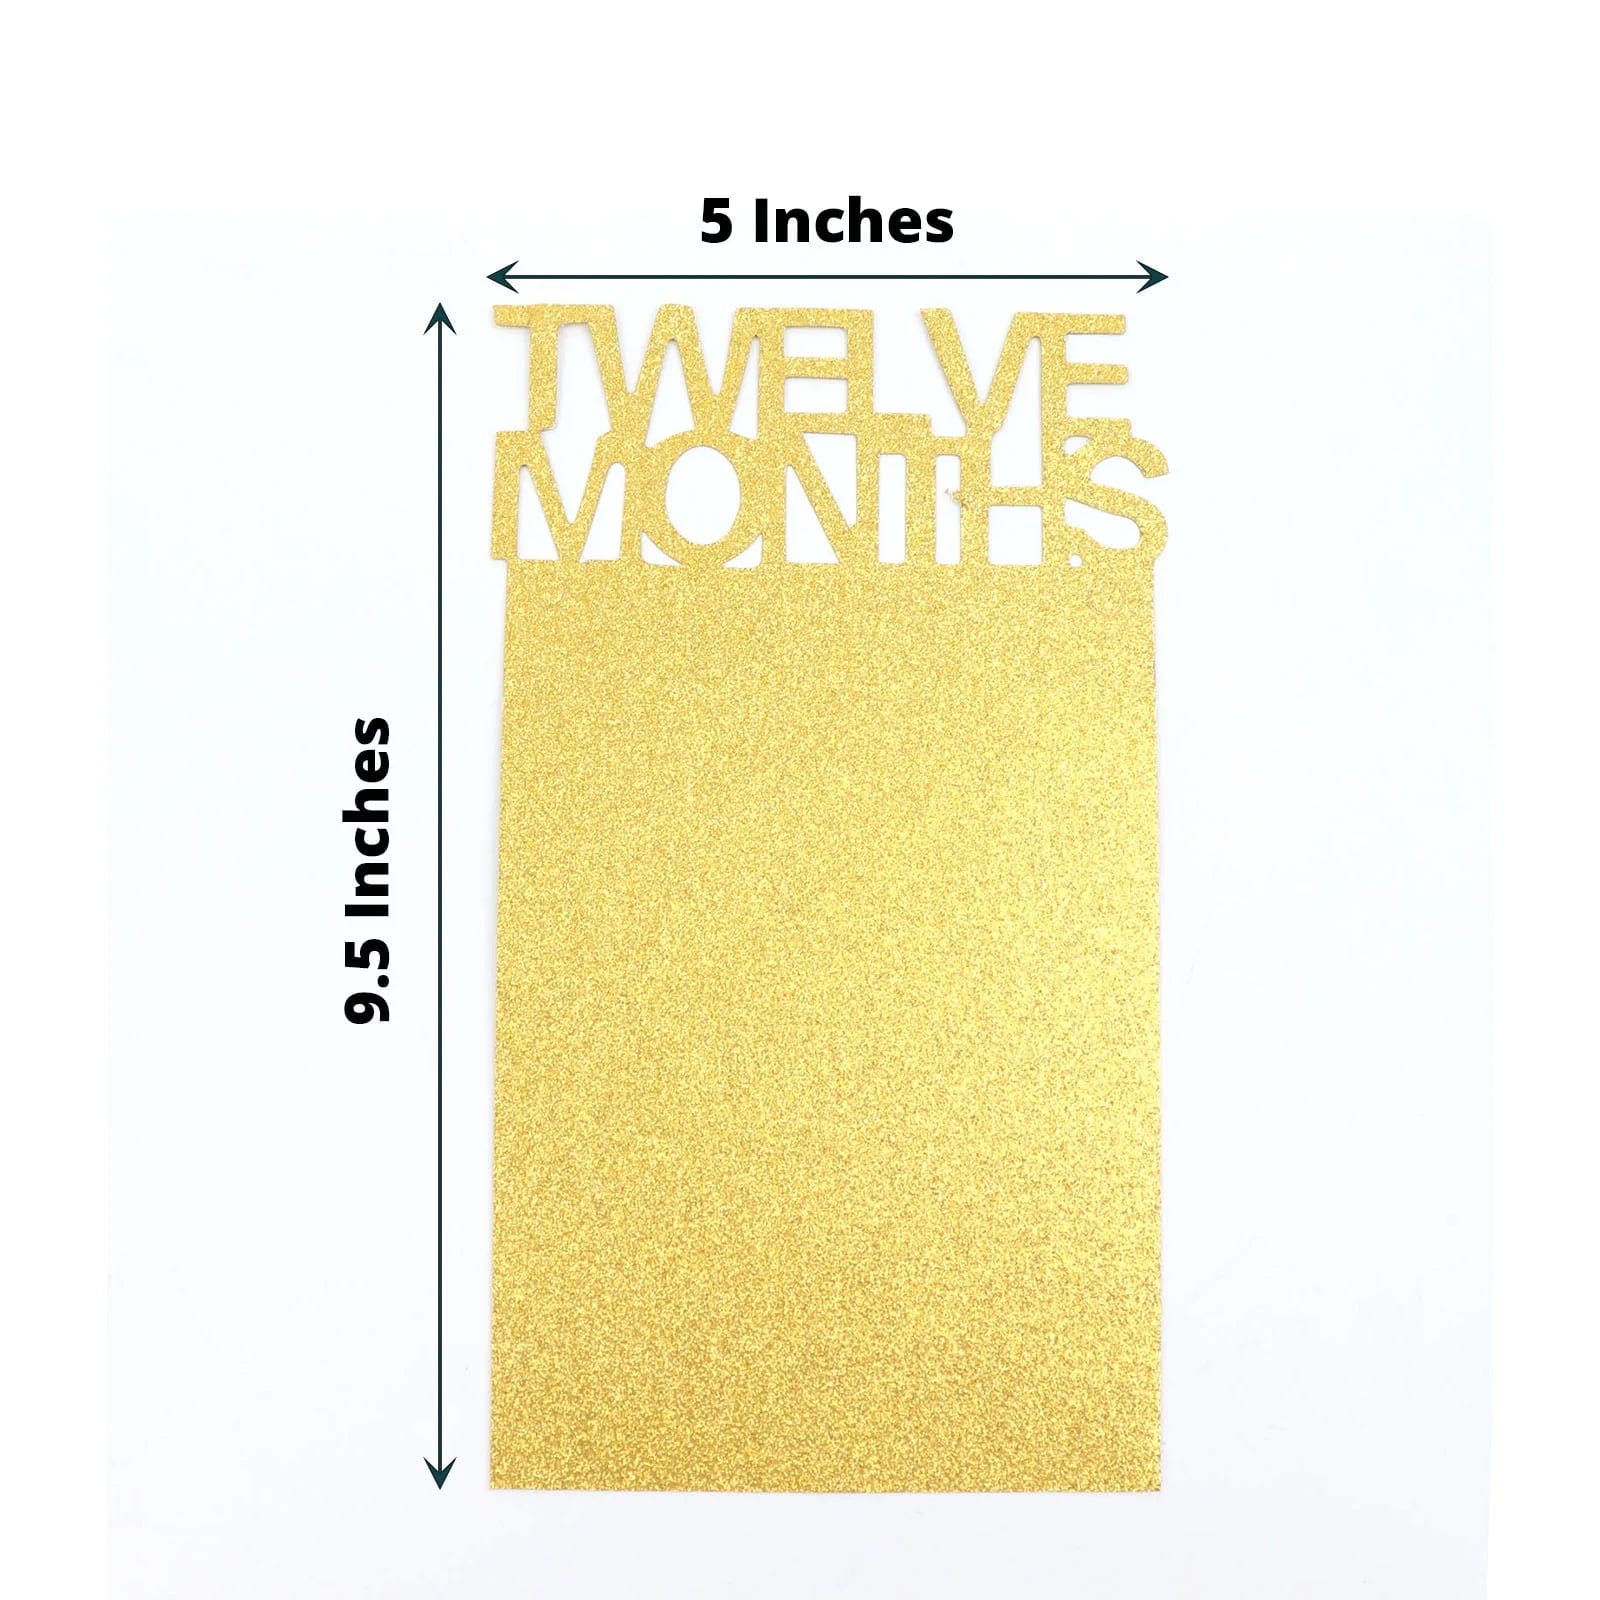 5.5 feet Gold Baby Month Milestone Paper Hanging 1st Birthday Party Garland